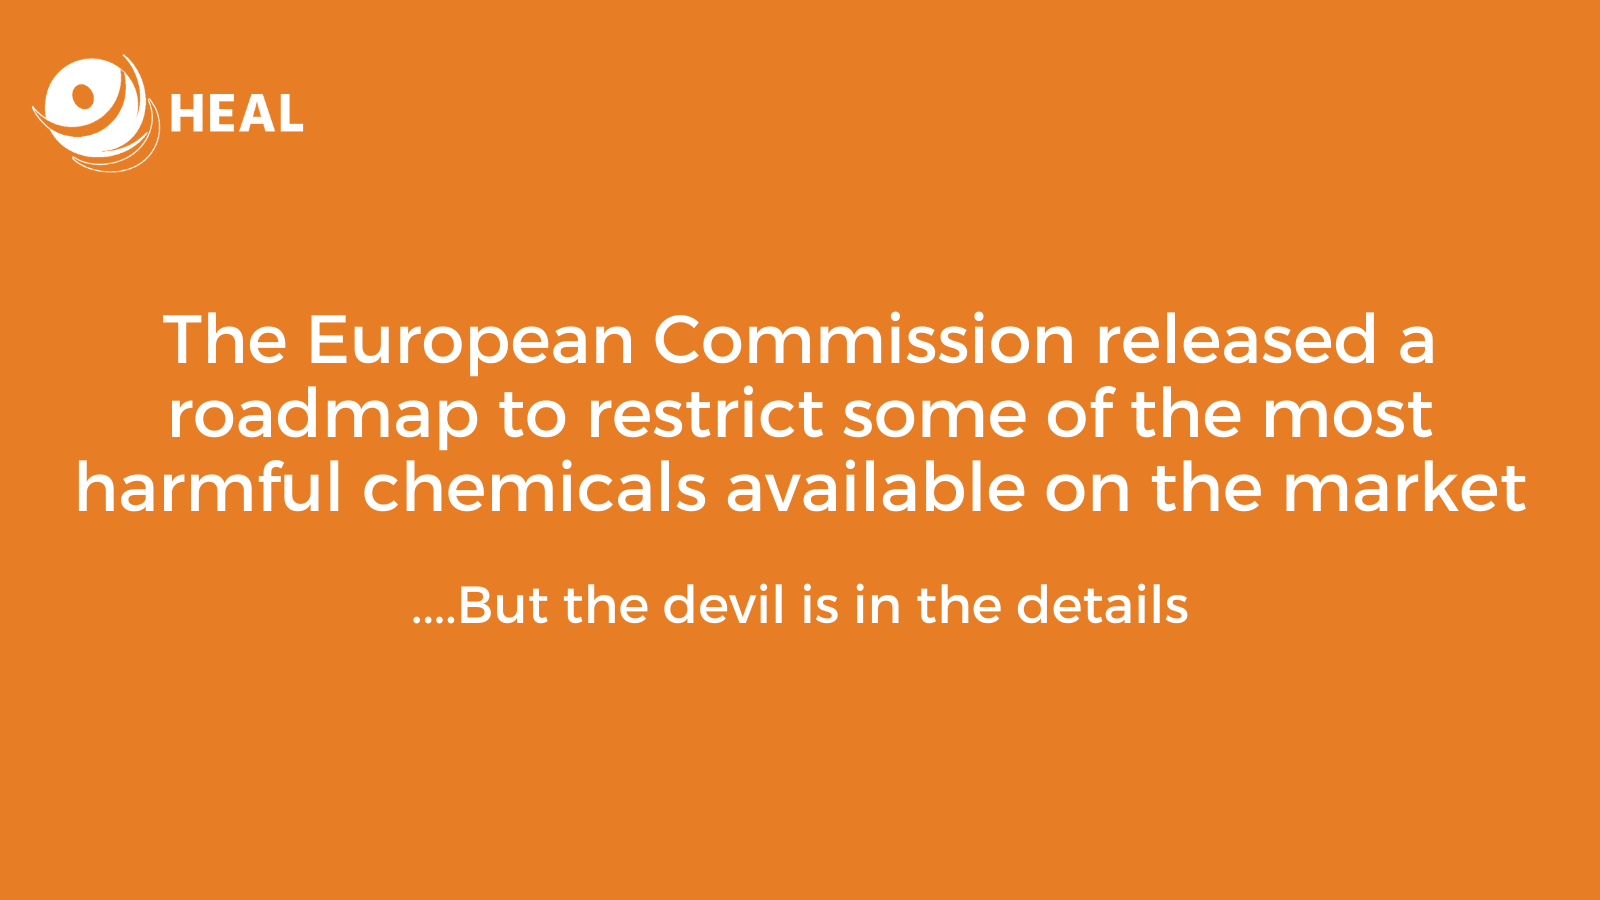 European Commission publishes roadmap for restrictions on most harmful chemicals, but important implementation details are missing